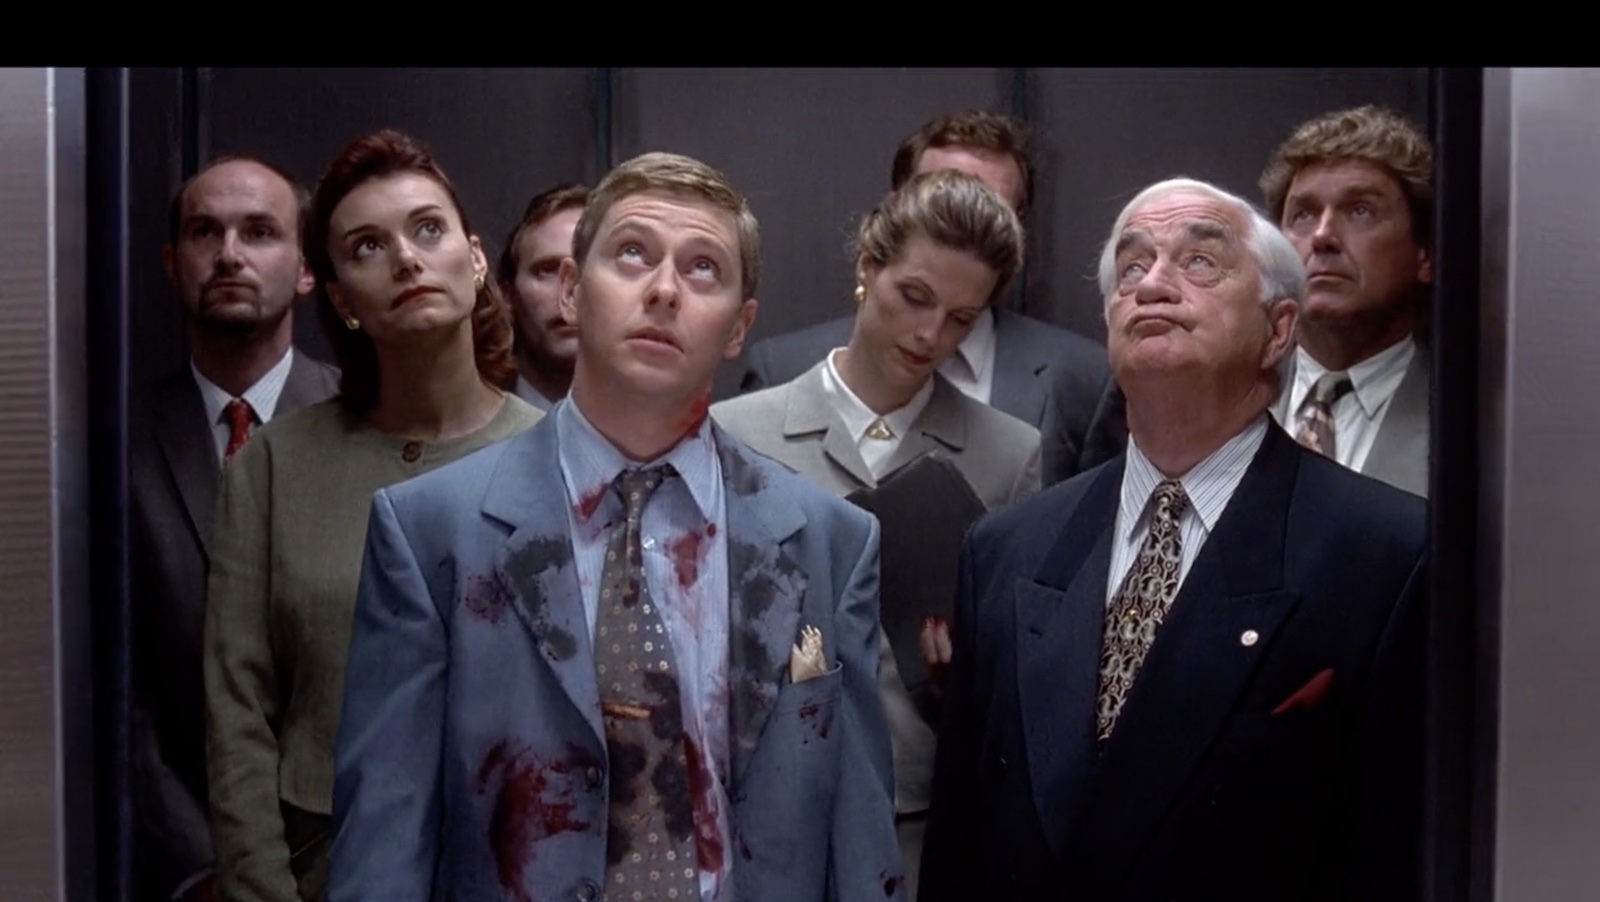 A man in a bloodied suit stands in an elevator and looks up, surrounded by others